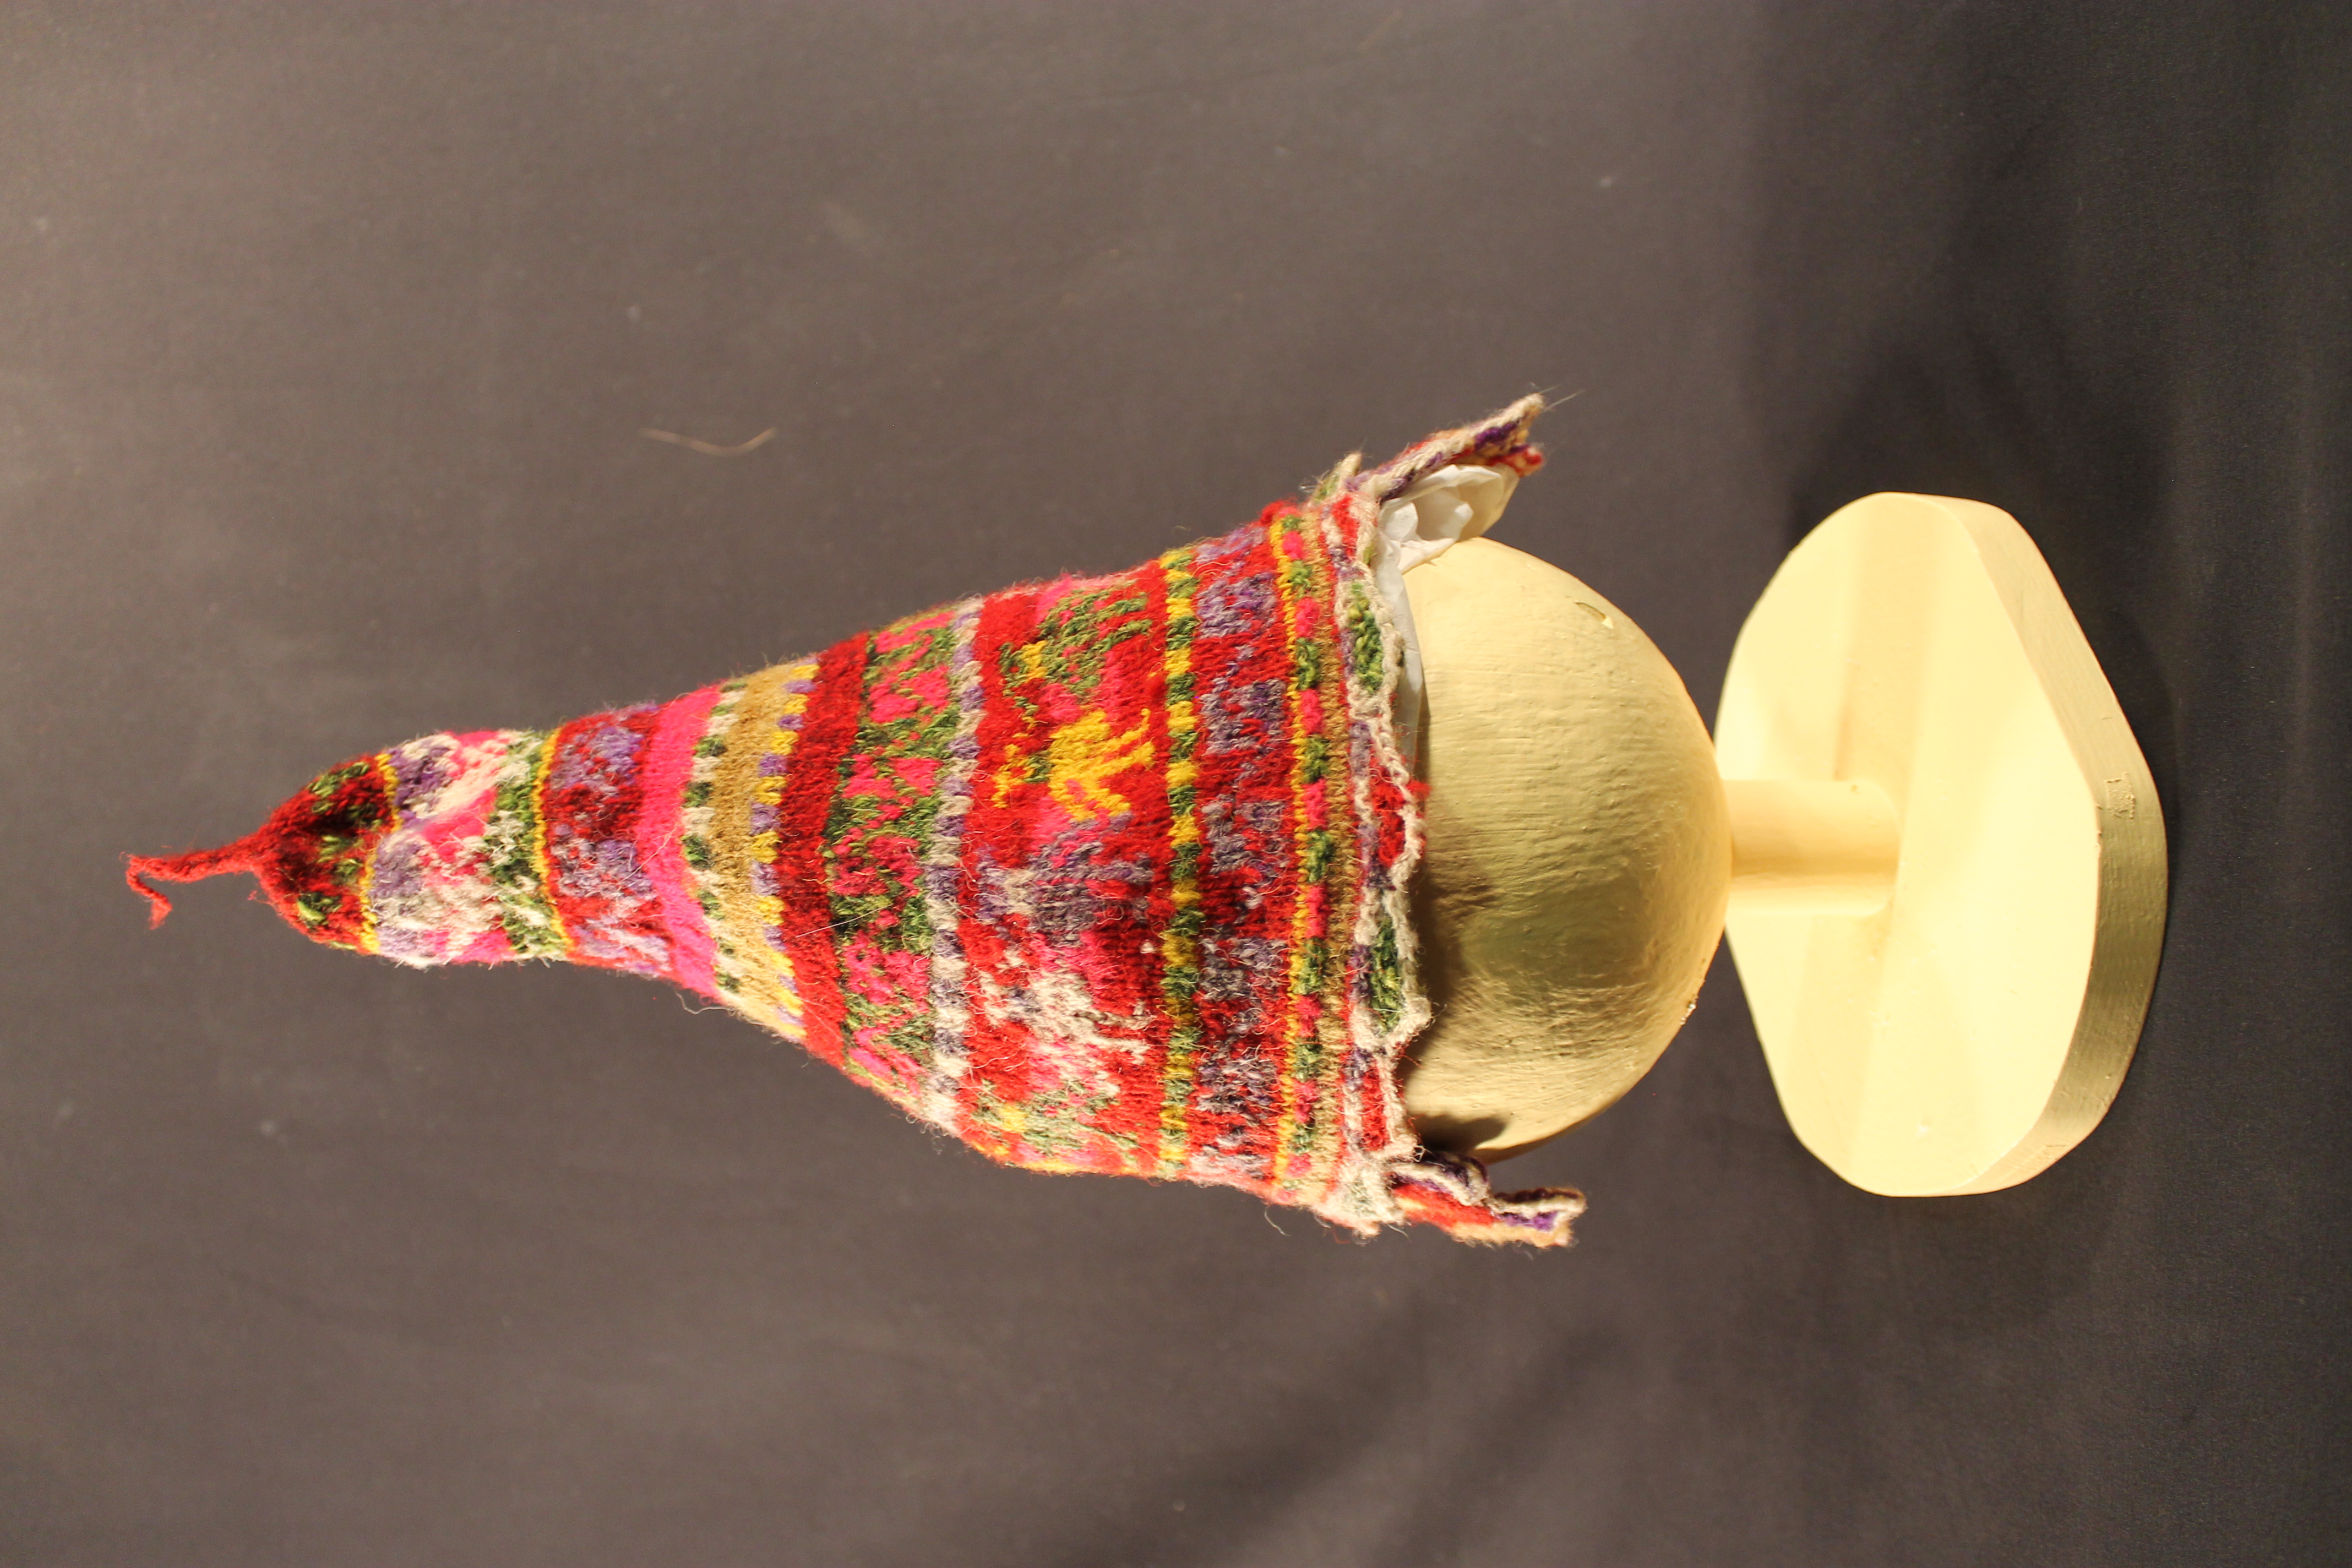 The cap is made of red, green, yellow, purple, white, pink, and tan wool. The cap has two flaps on either side and there is a string that stands straight up on the top.